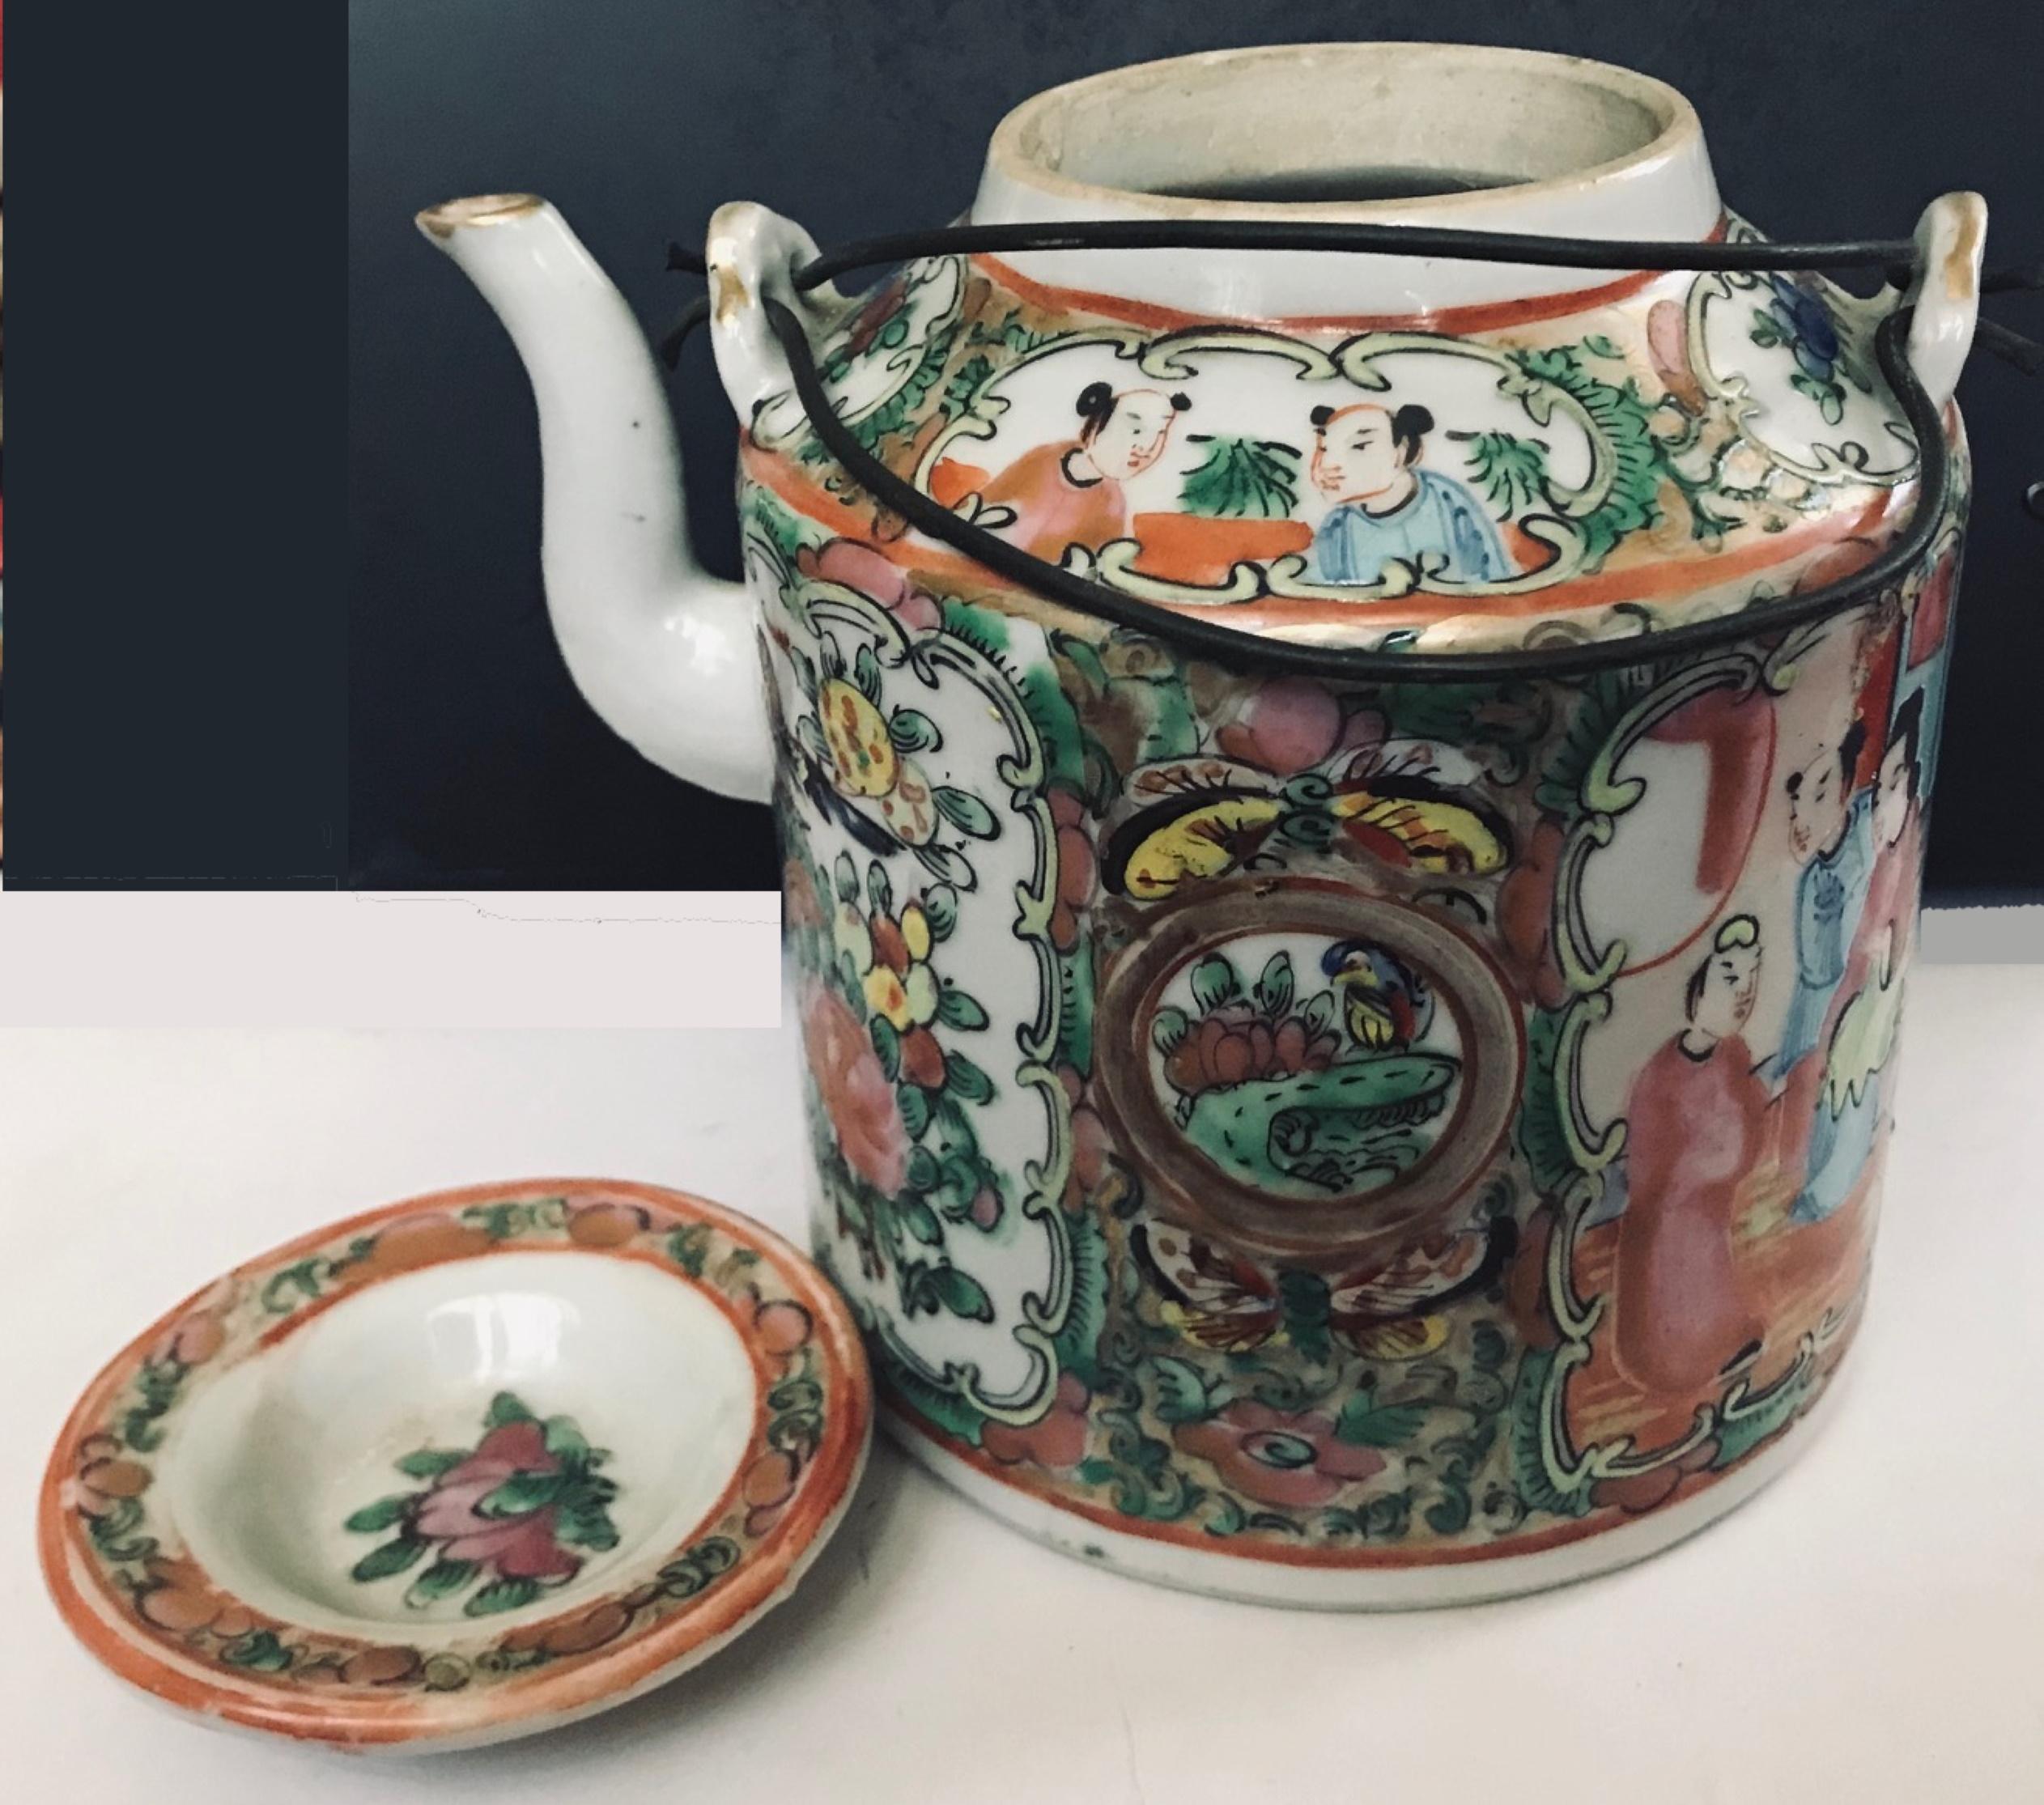 Antique Chinese Porcelain teapot with wire handles, Qing Dynasty Canton Rose Medallion circa 1850.

This Chinese cylinder form teapot is in excellent condition. It has double wire handles and traditional finely painted panels. No losses, cracks or